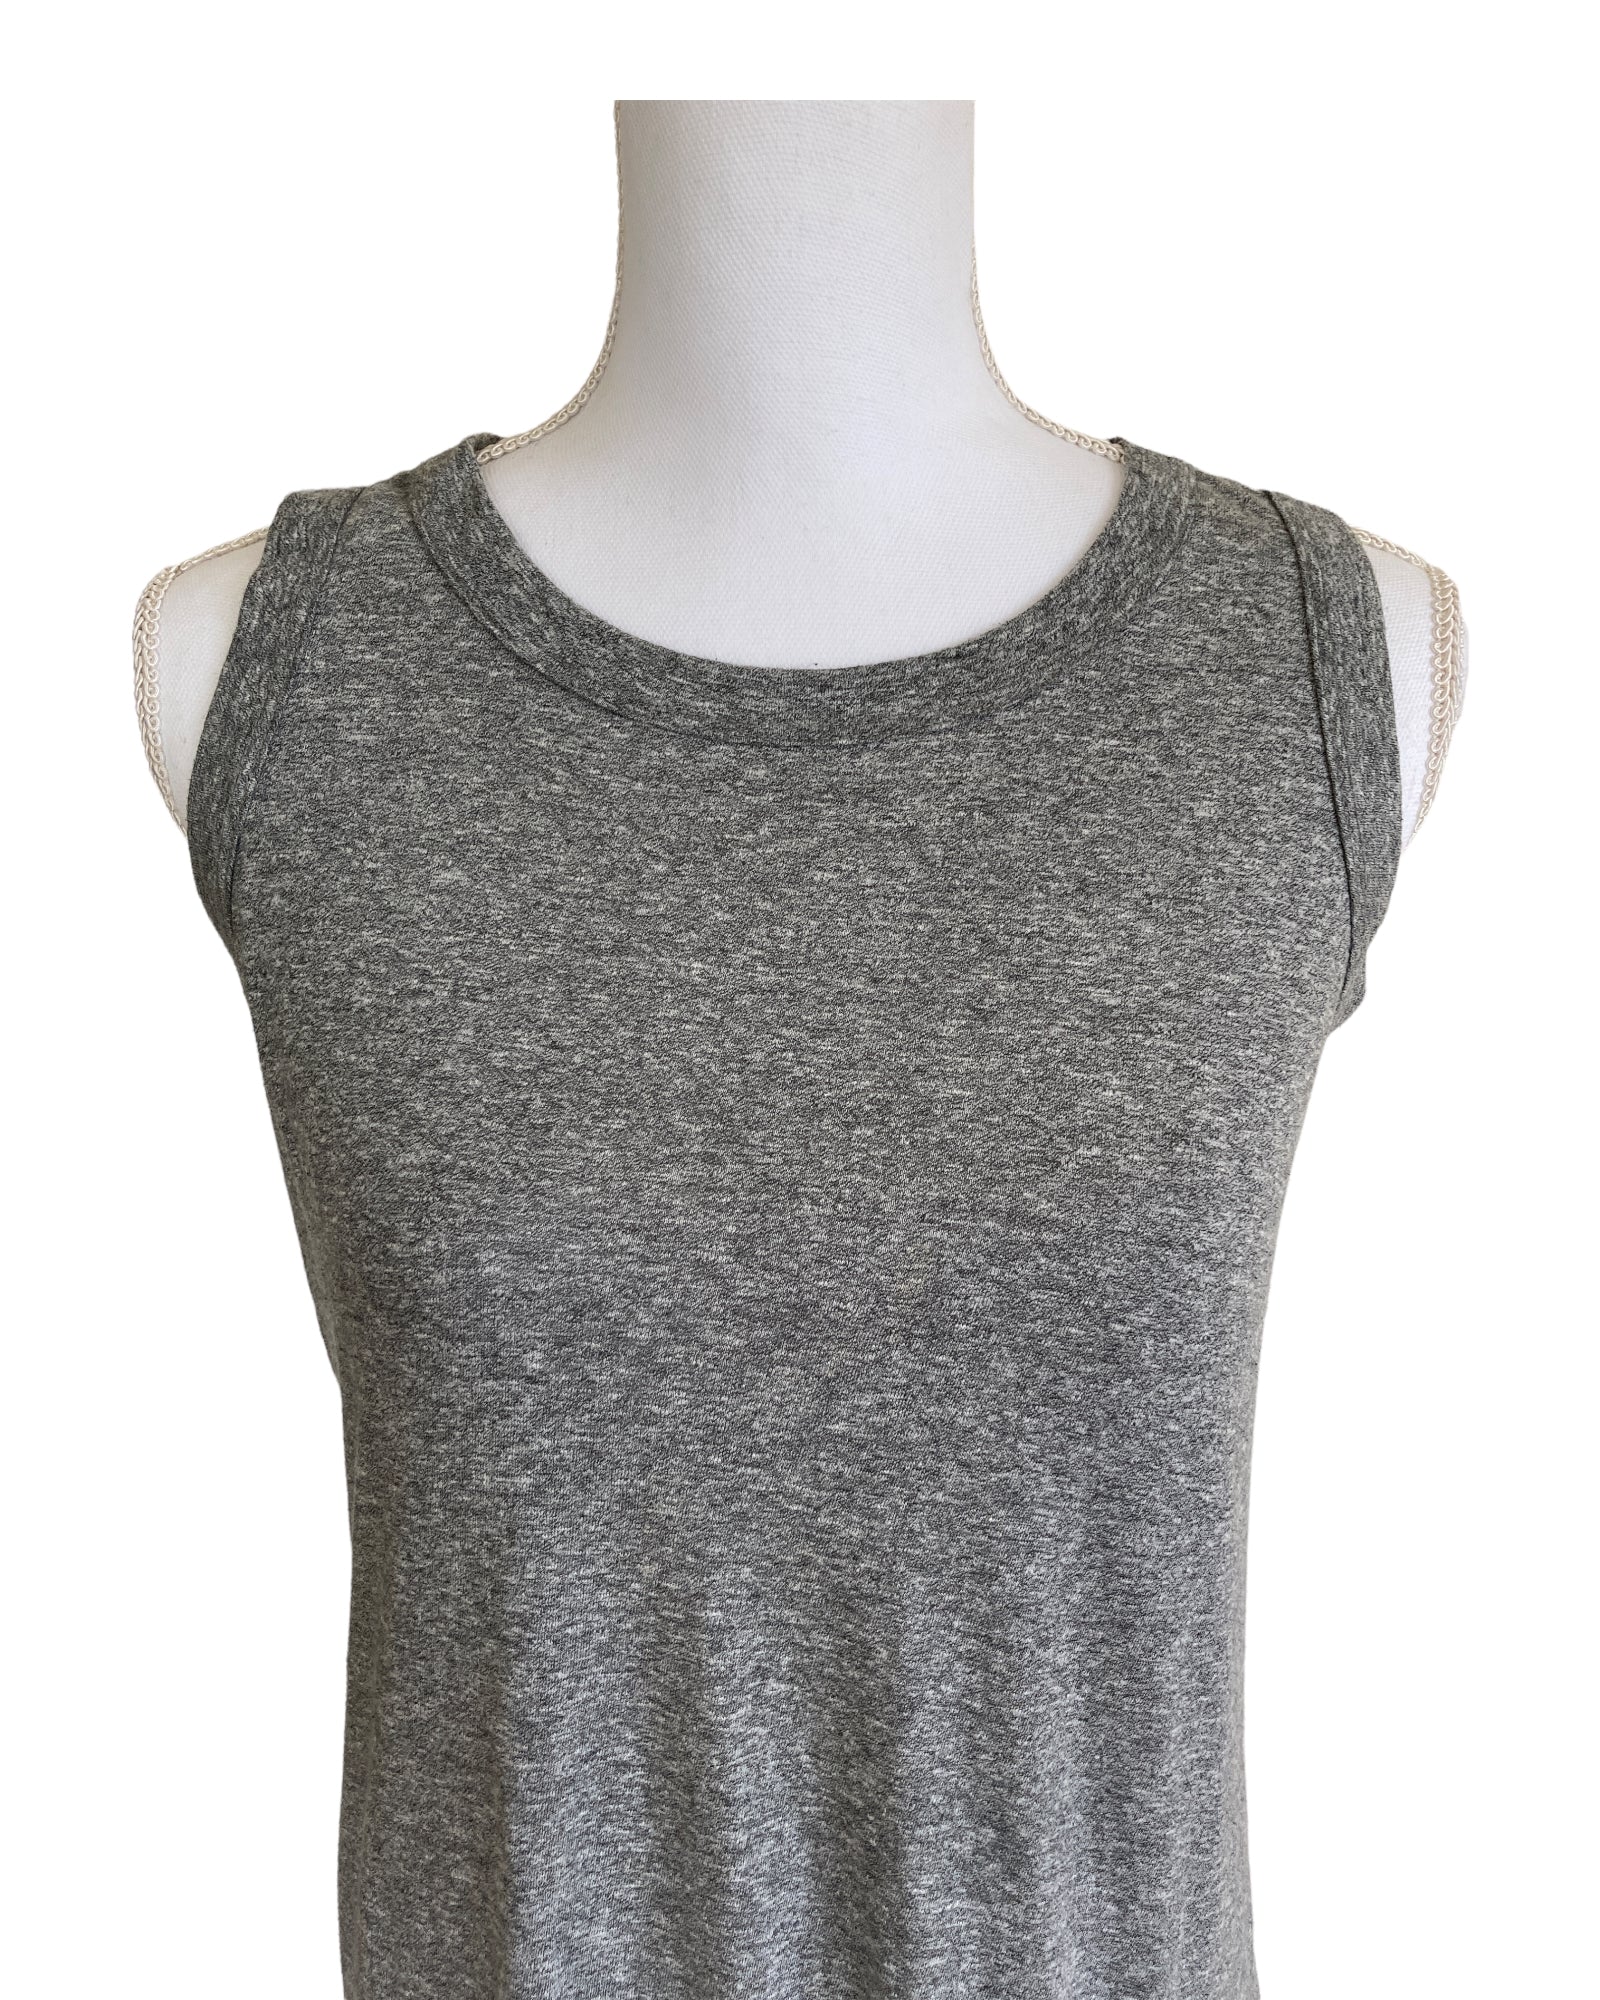 Current Elliot The Perfect Muscle Tee Heather Grey Dress, S